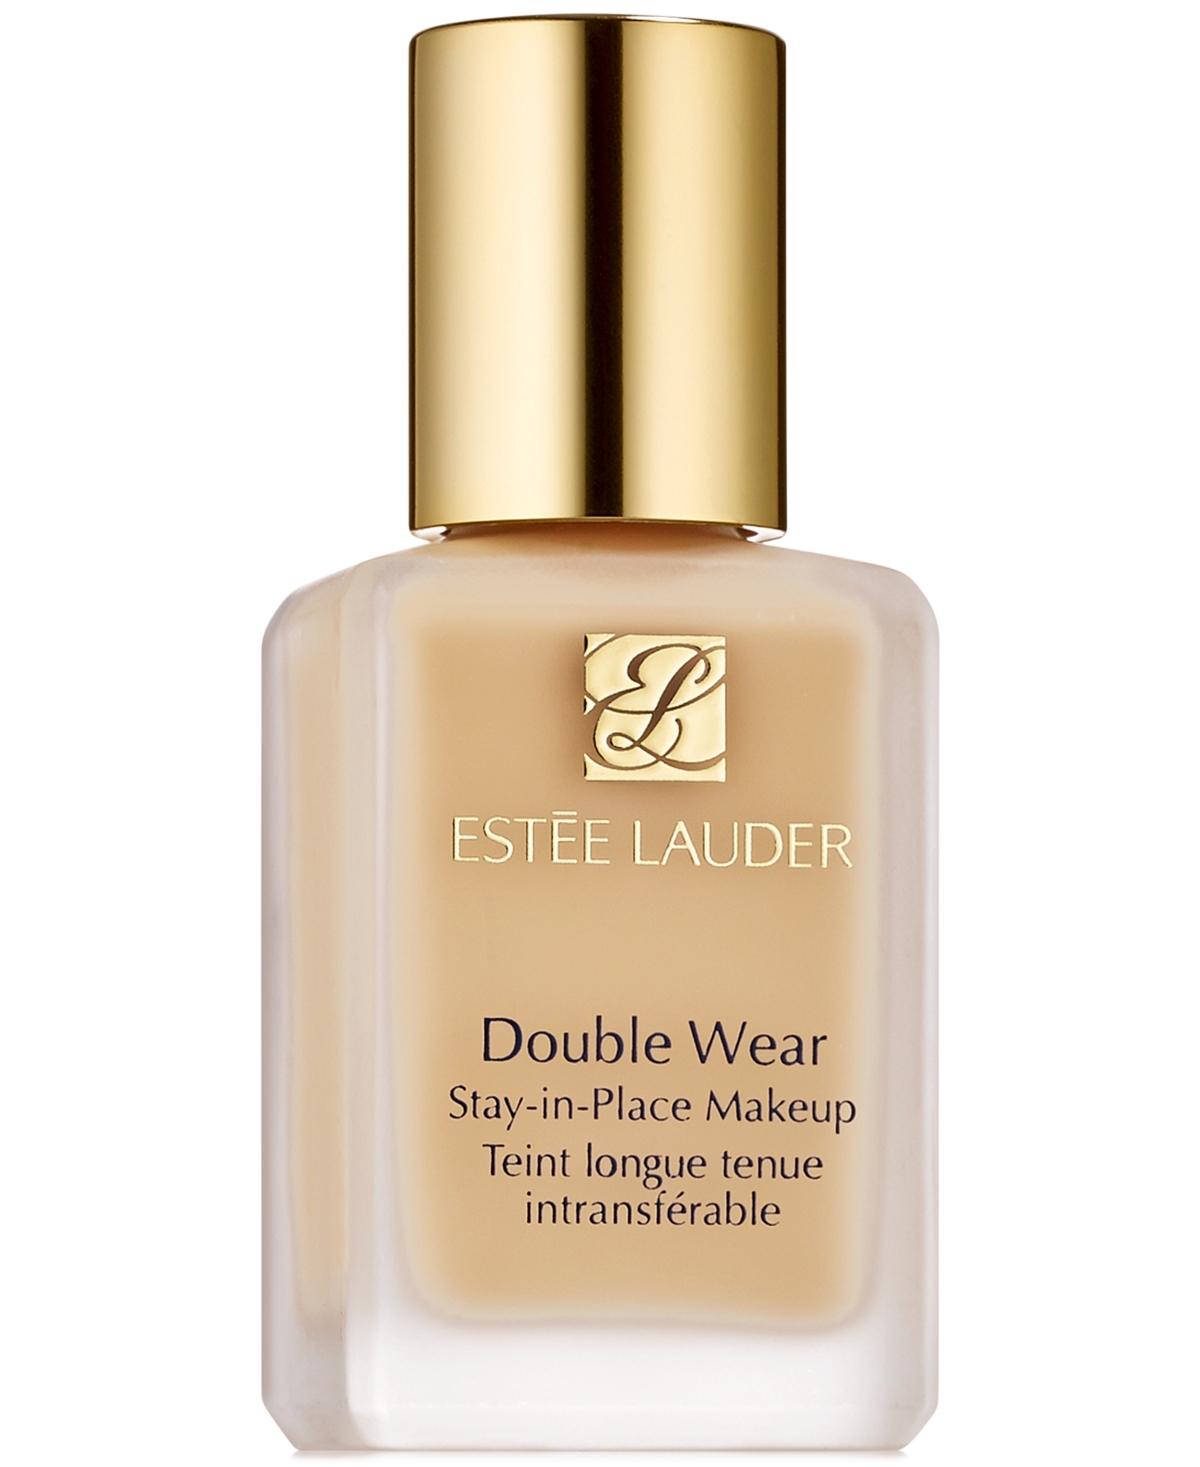 Estée Lauder Double Wear Stay-in-place Makeup, 1 Oz. In N Ivory Nude,light With Neutral Peach U